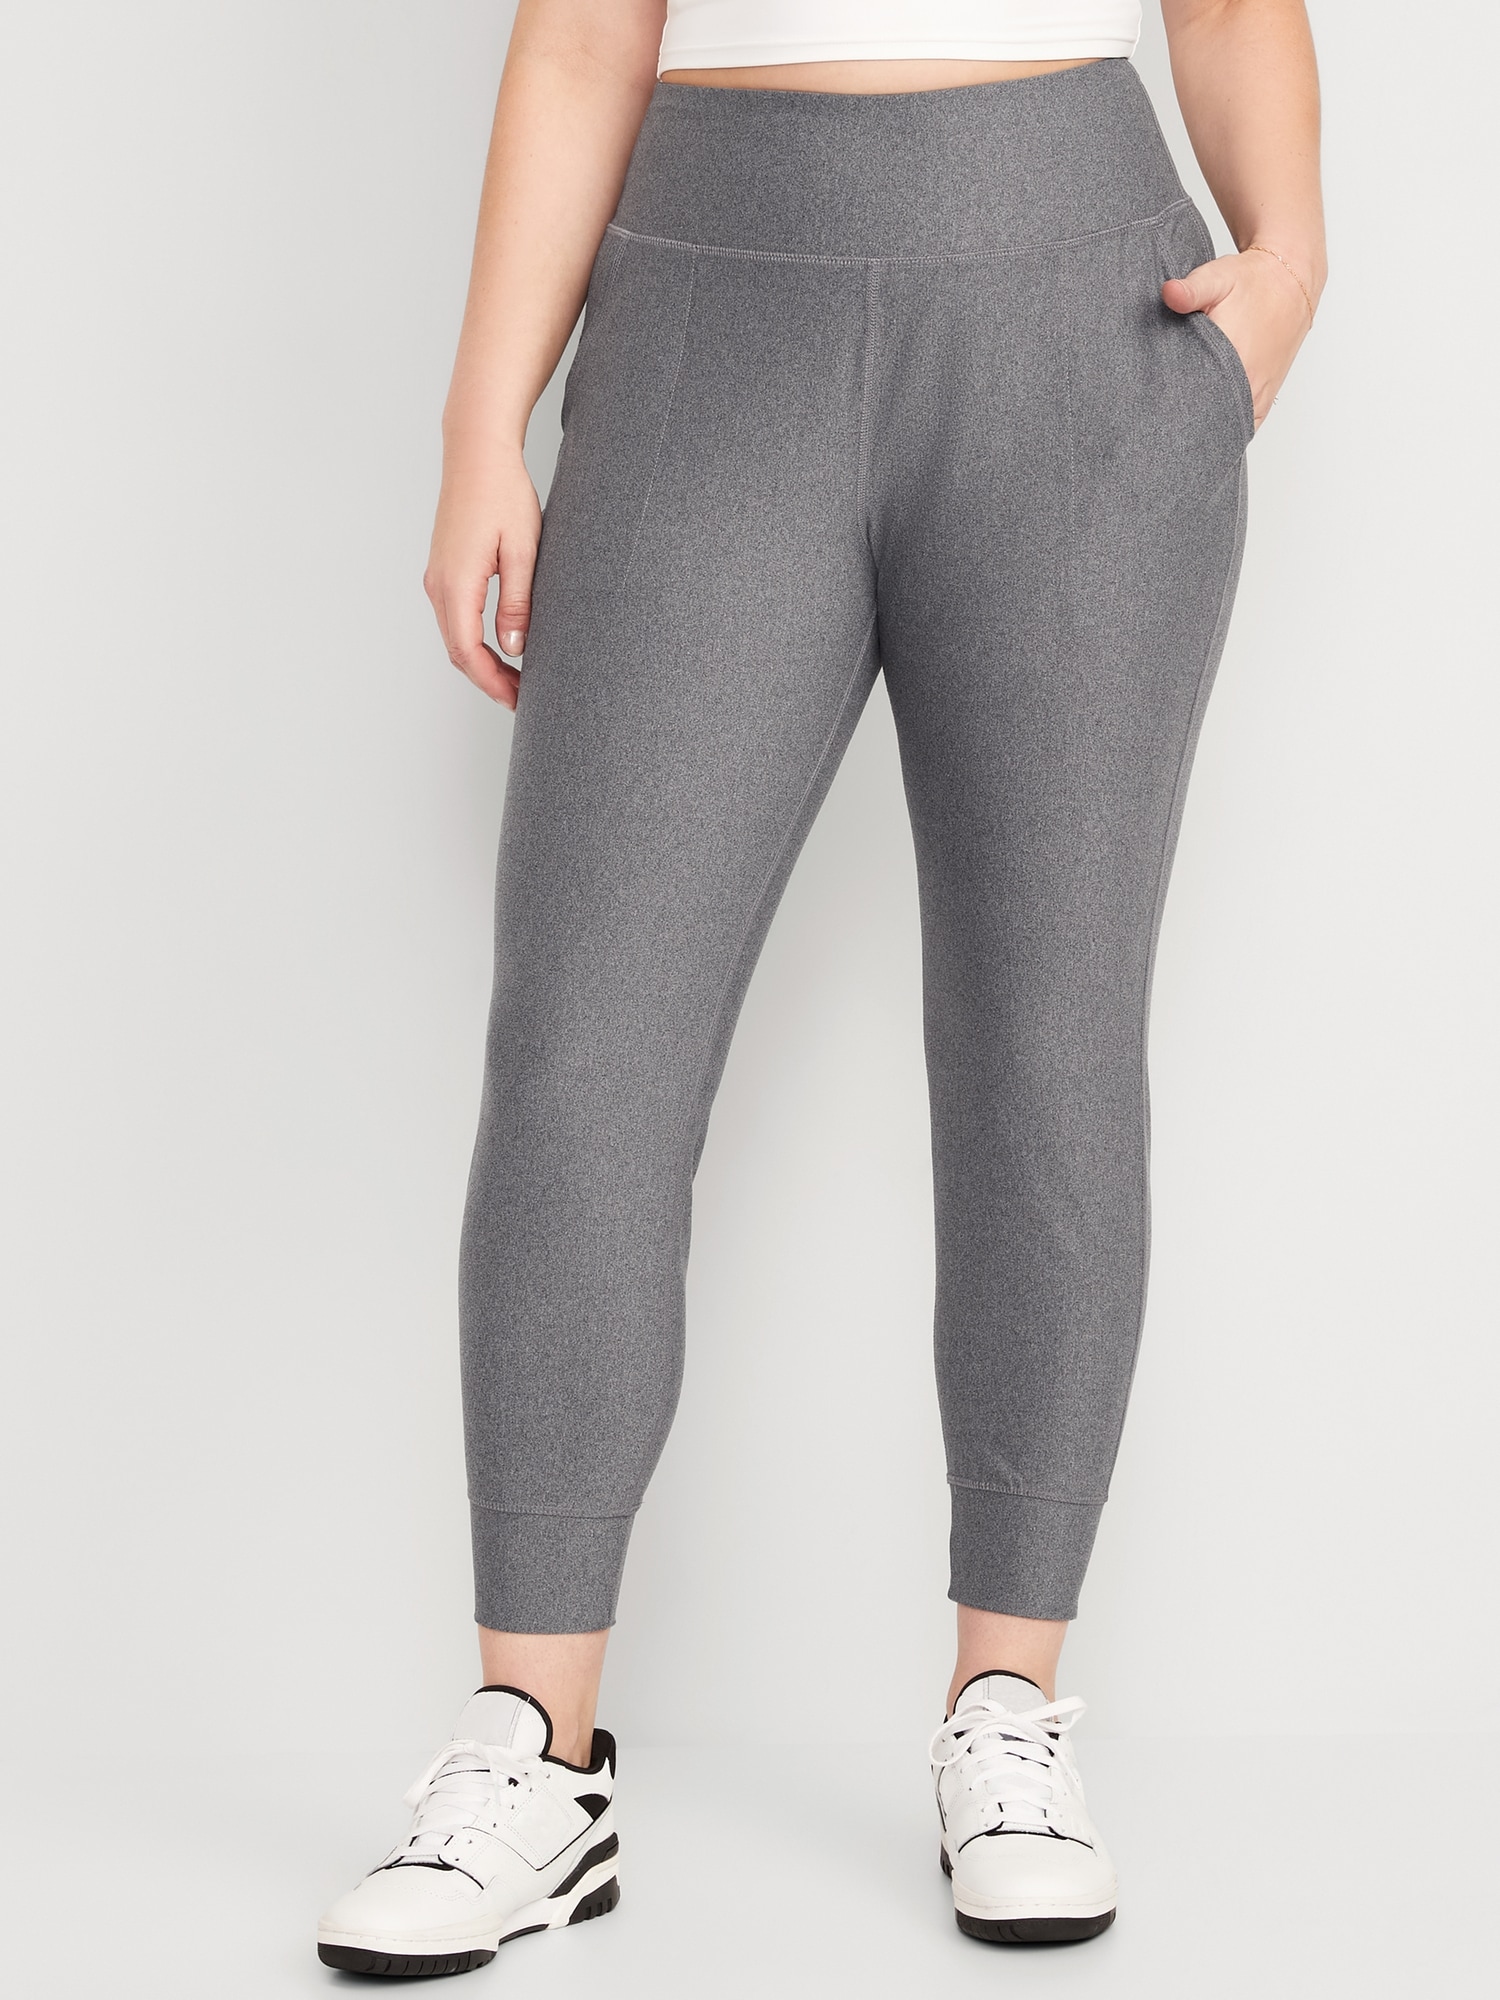 7 Reasons to Buy/Not to Buy Old Navy High-Waisted PowerSoft ⅞-Length Joggers